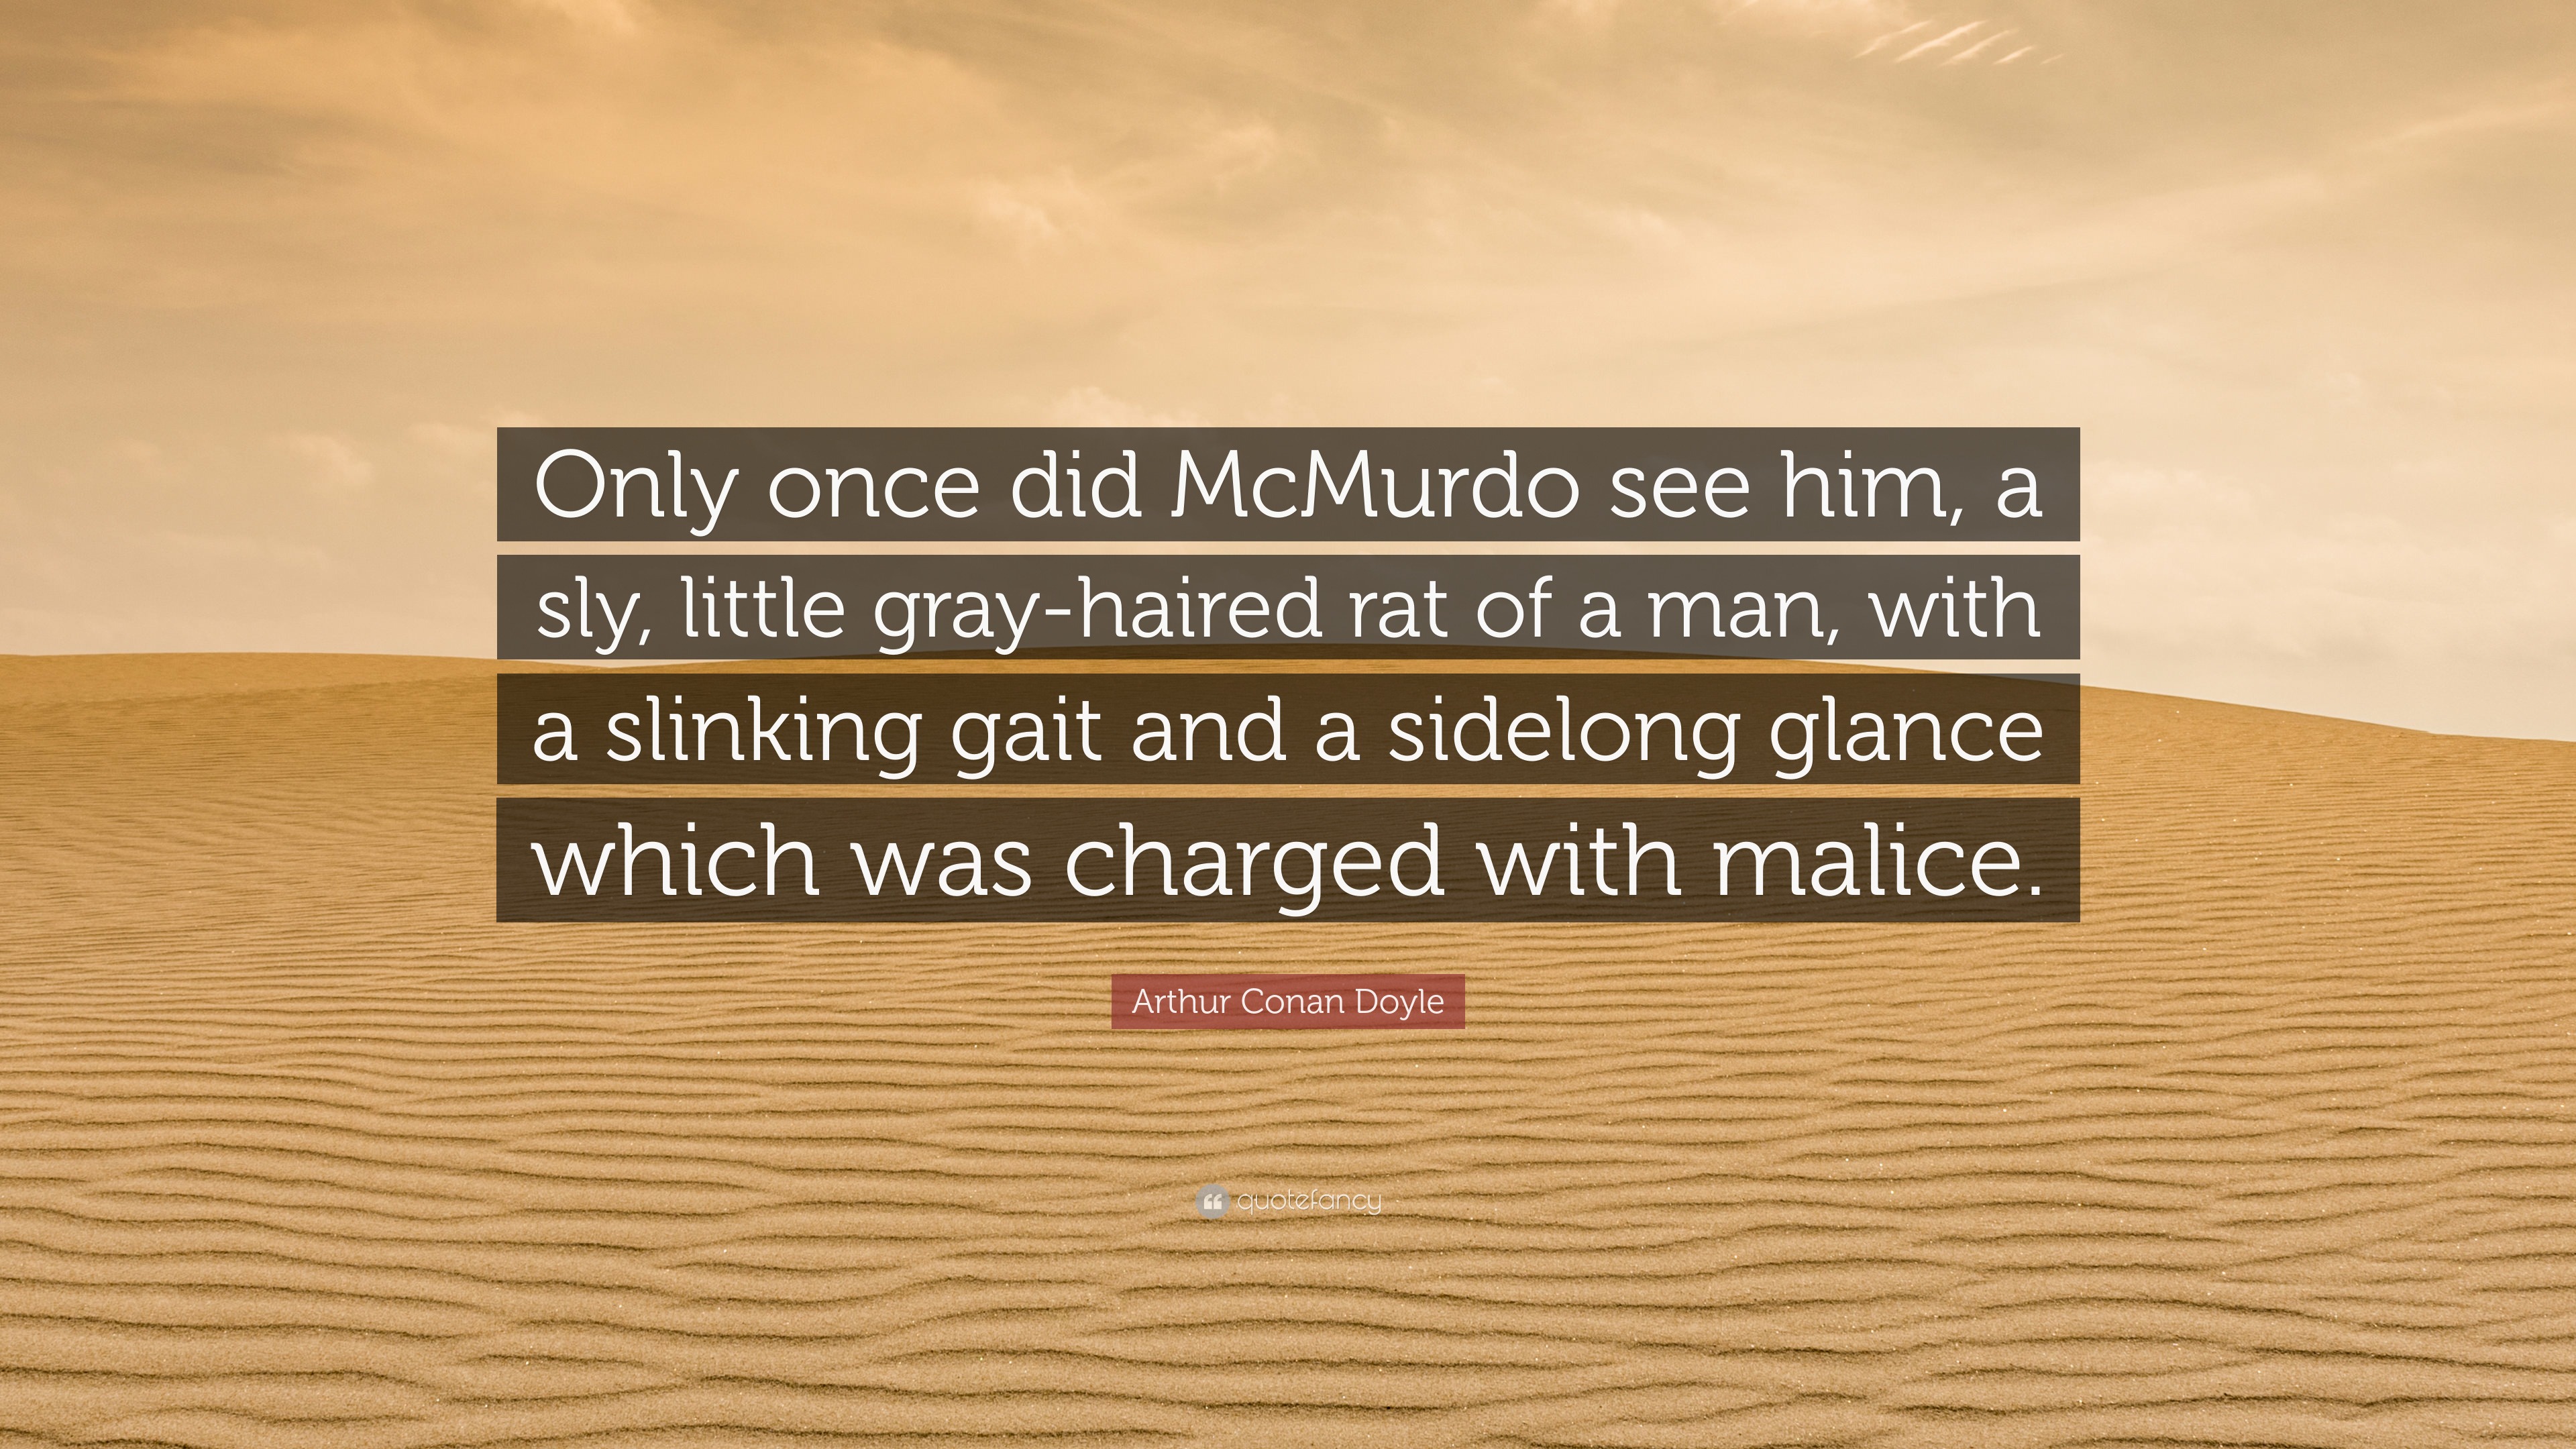 Arthur Conan Doyle Quote: “Only once did McMurdo see him